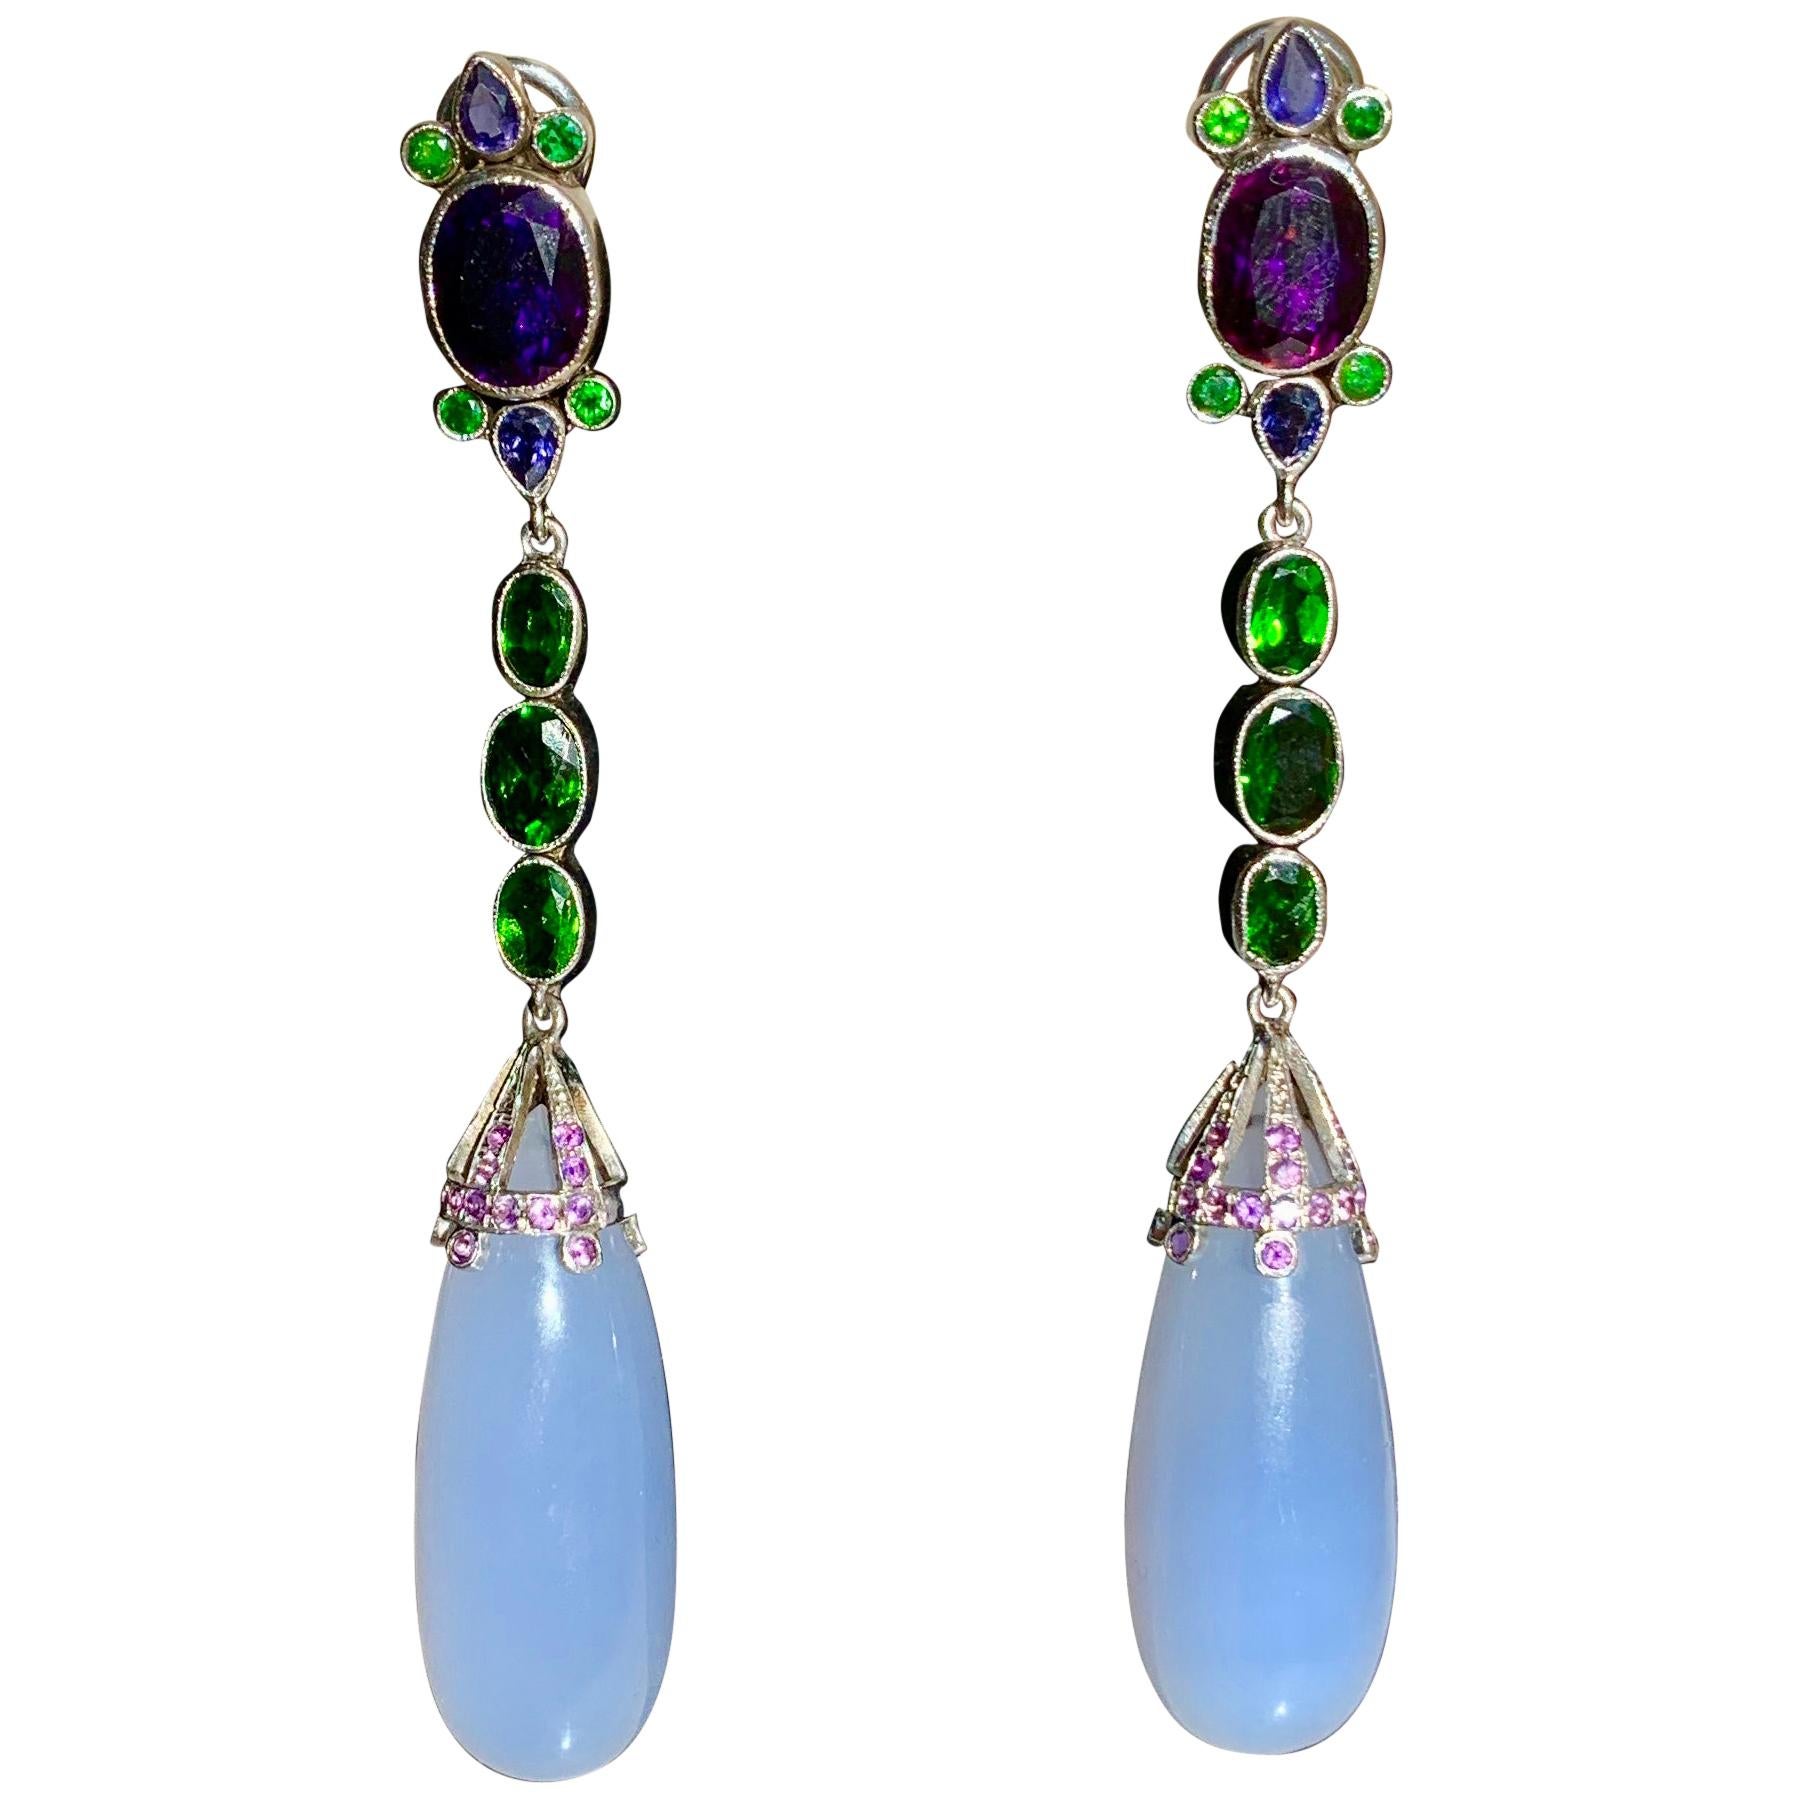  Natural Blue Chalcedony, Amethyst, Demantoid, and Chrome Diopside Drop Earrings